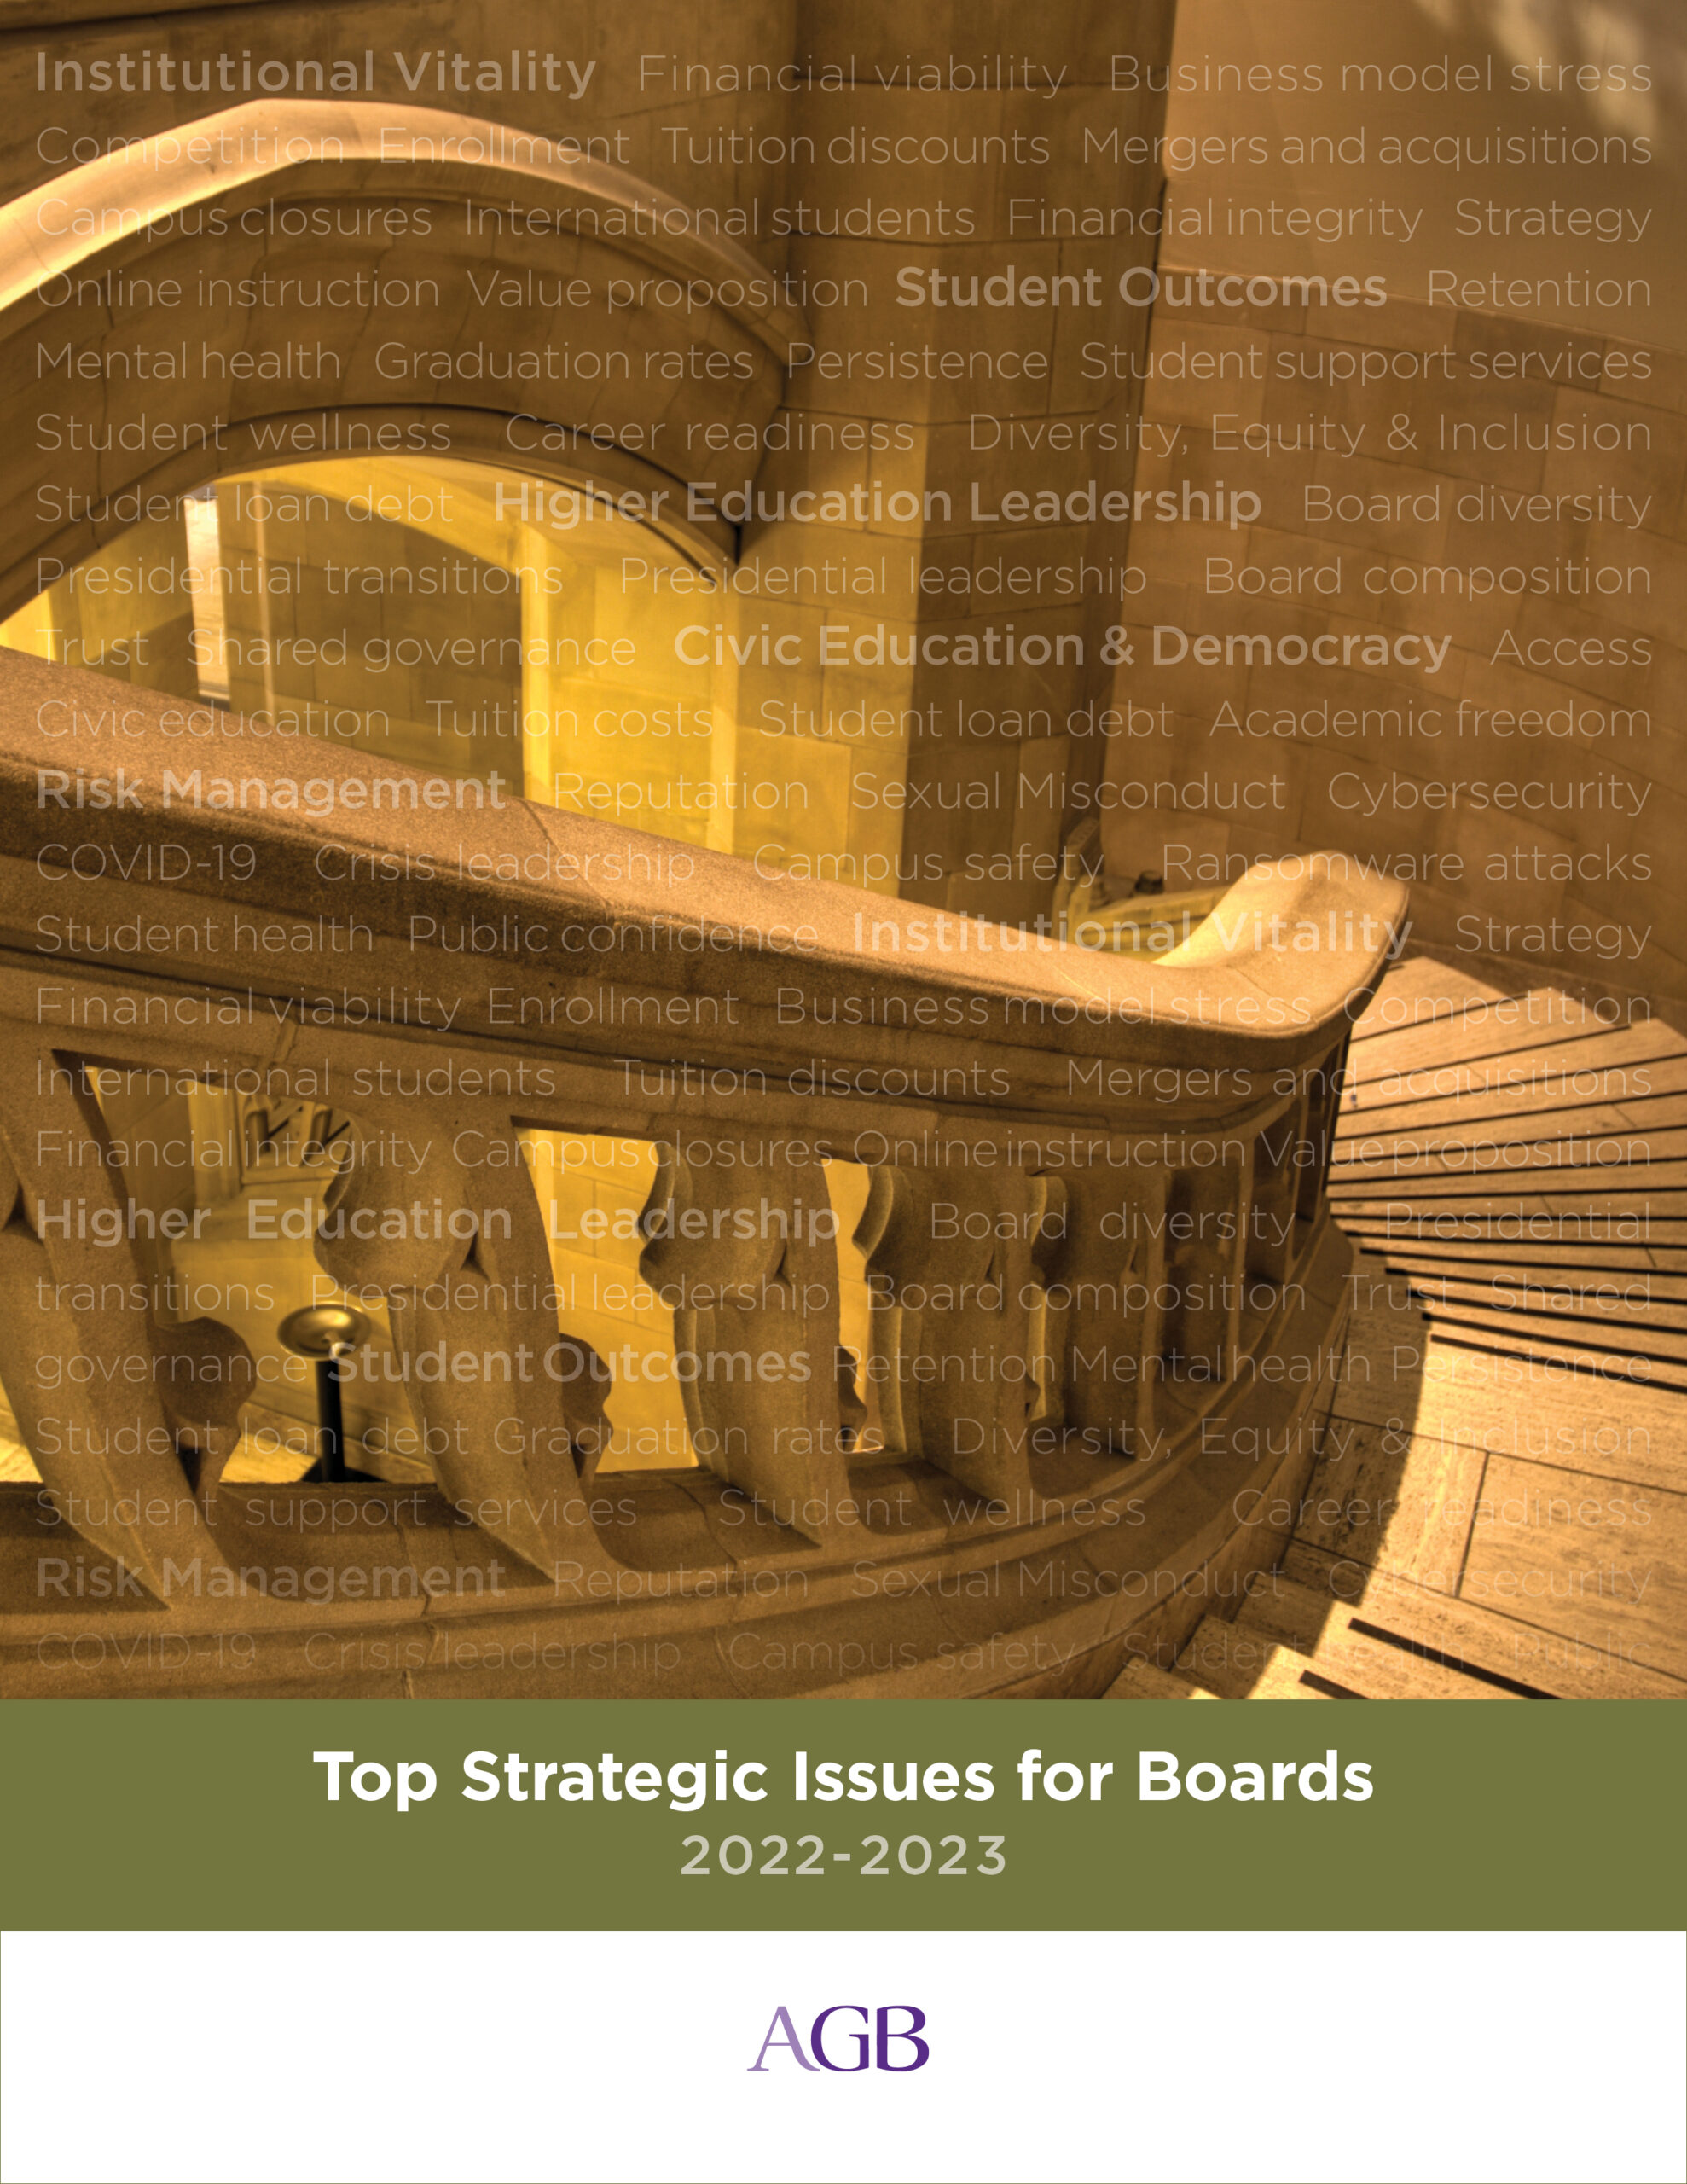 Top Strategic Issues for Boards 2022-2023